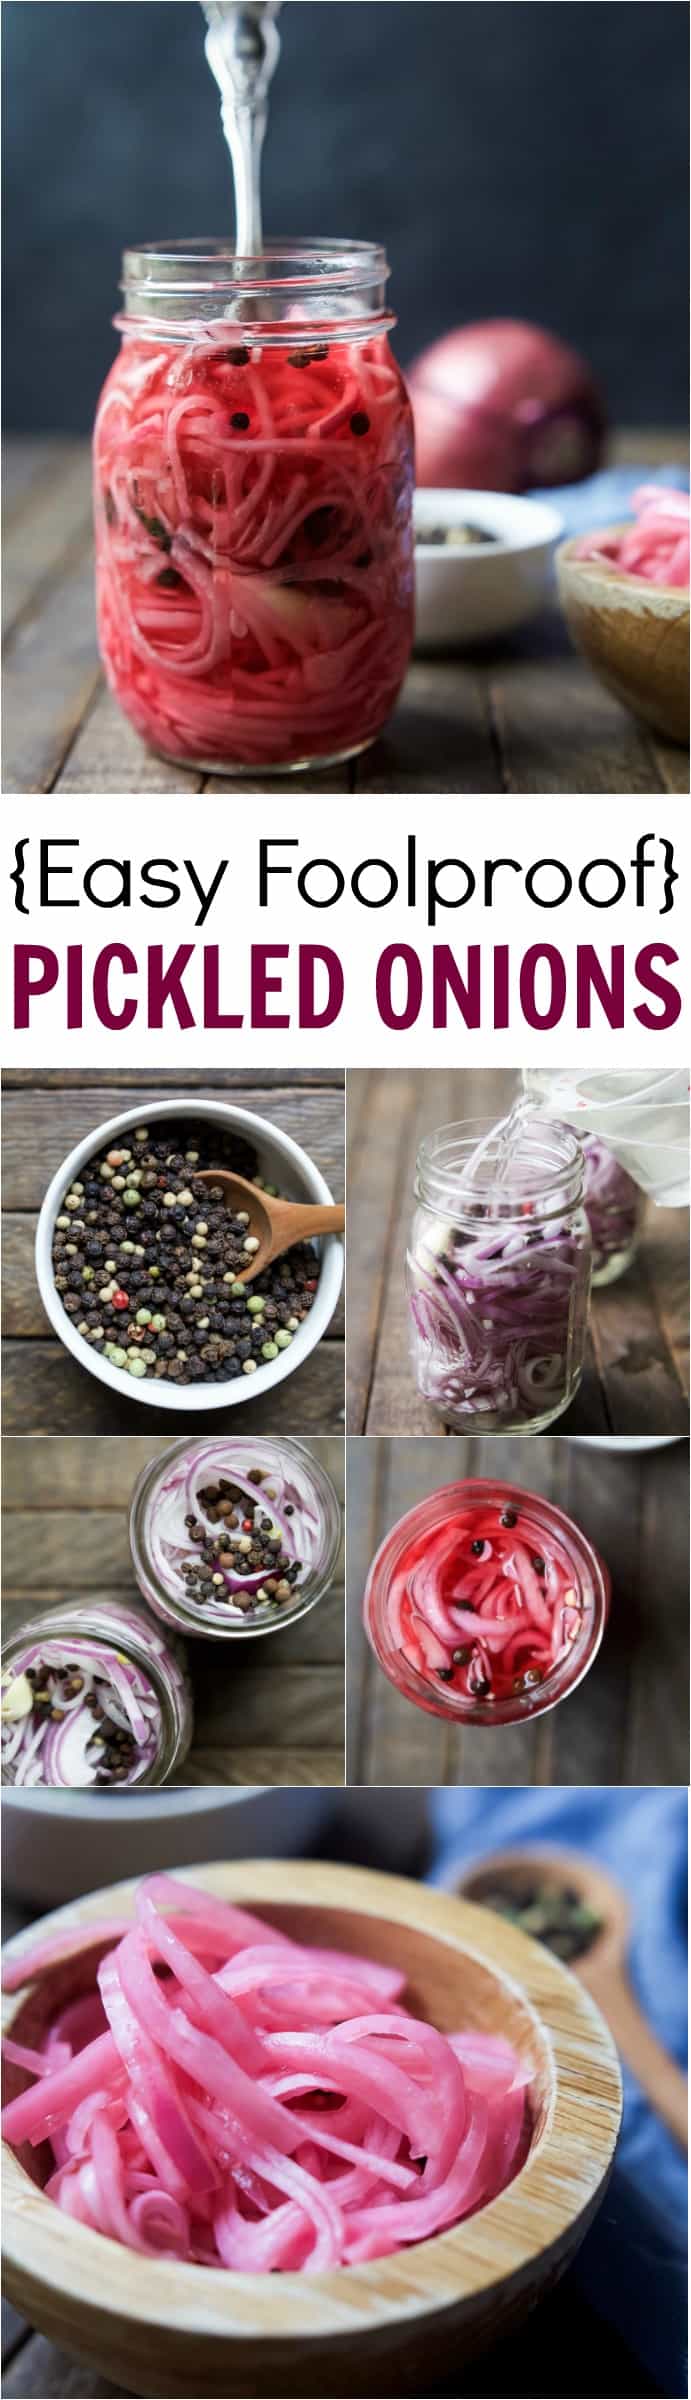 Recipe collage for Easy Foolproof Pickled Onions